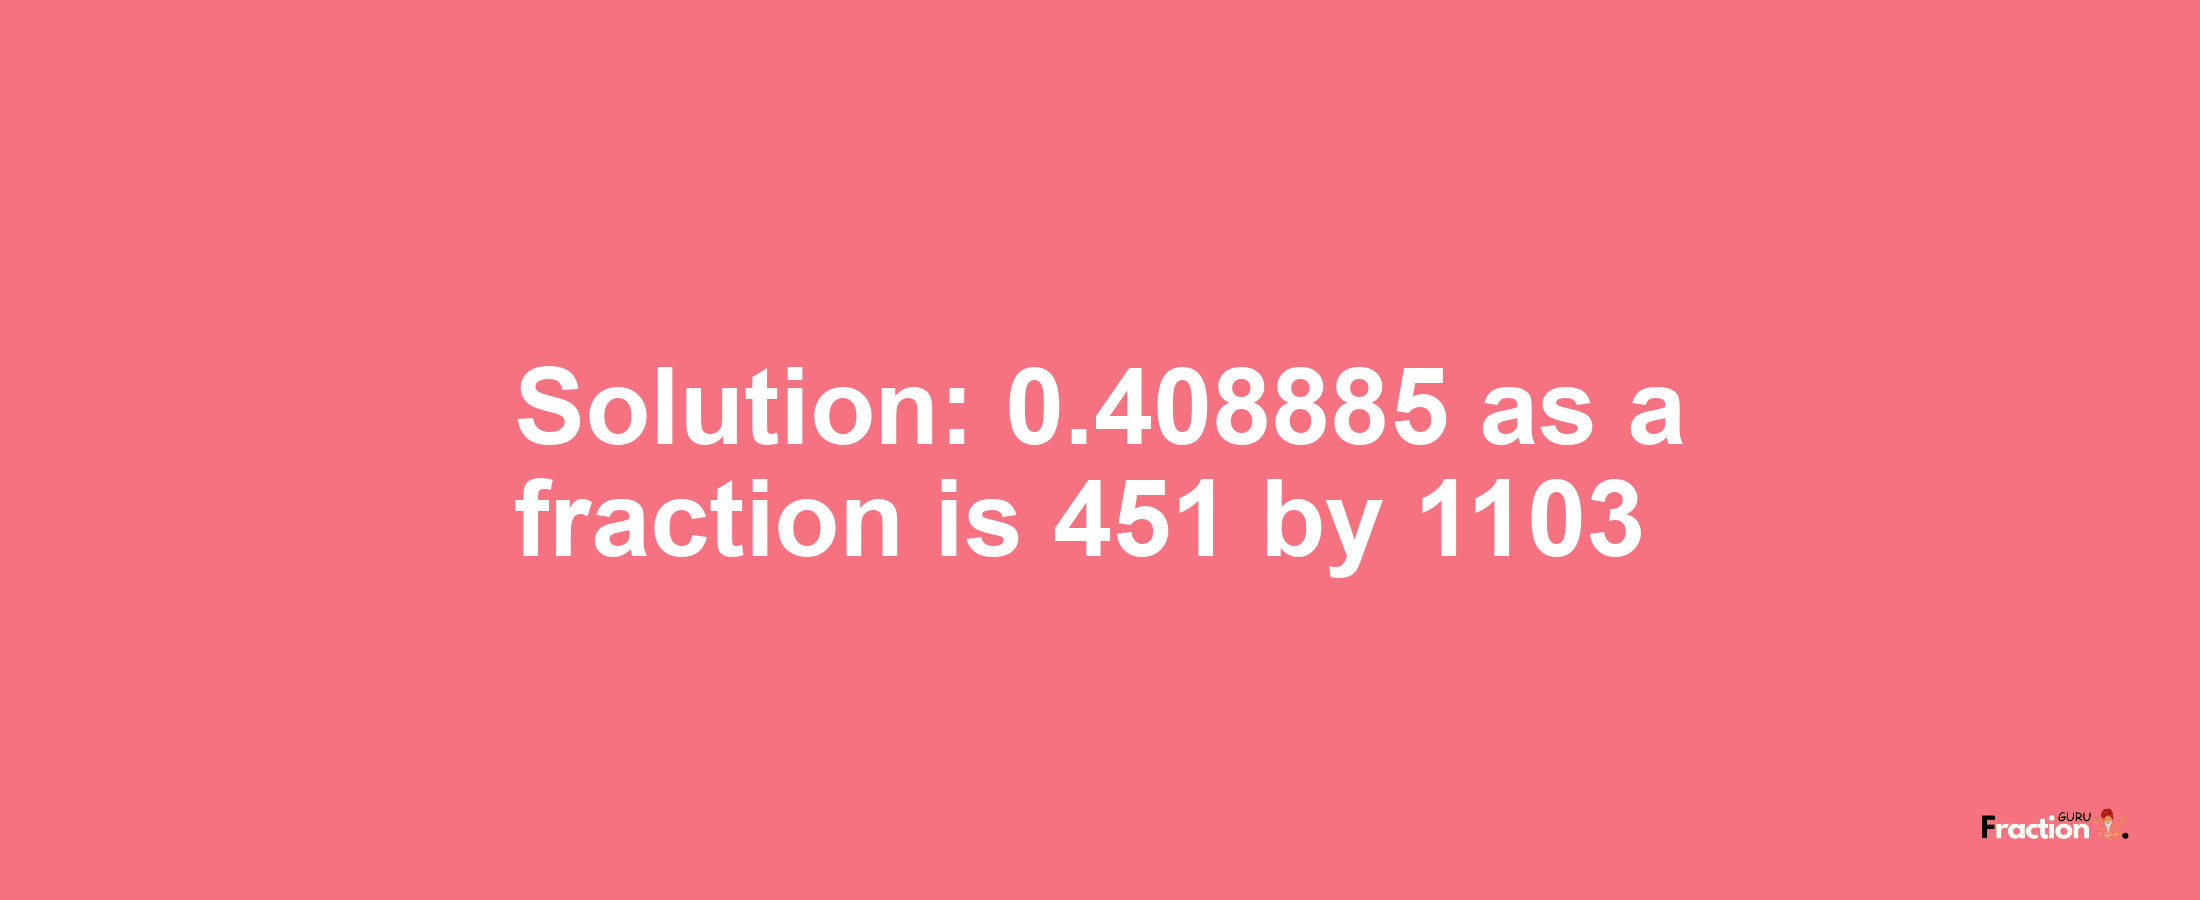 Solution:0.408885 as a fraction is 451/1103